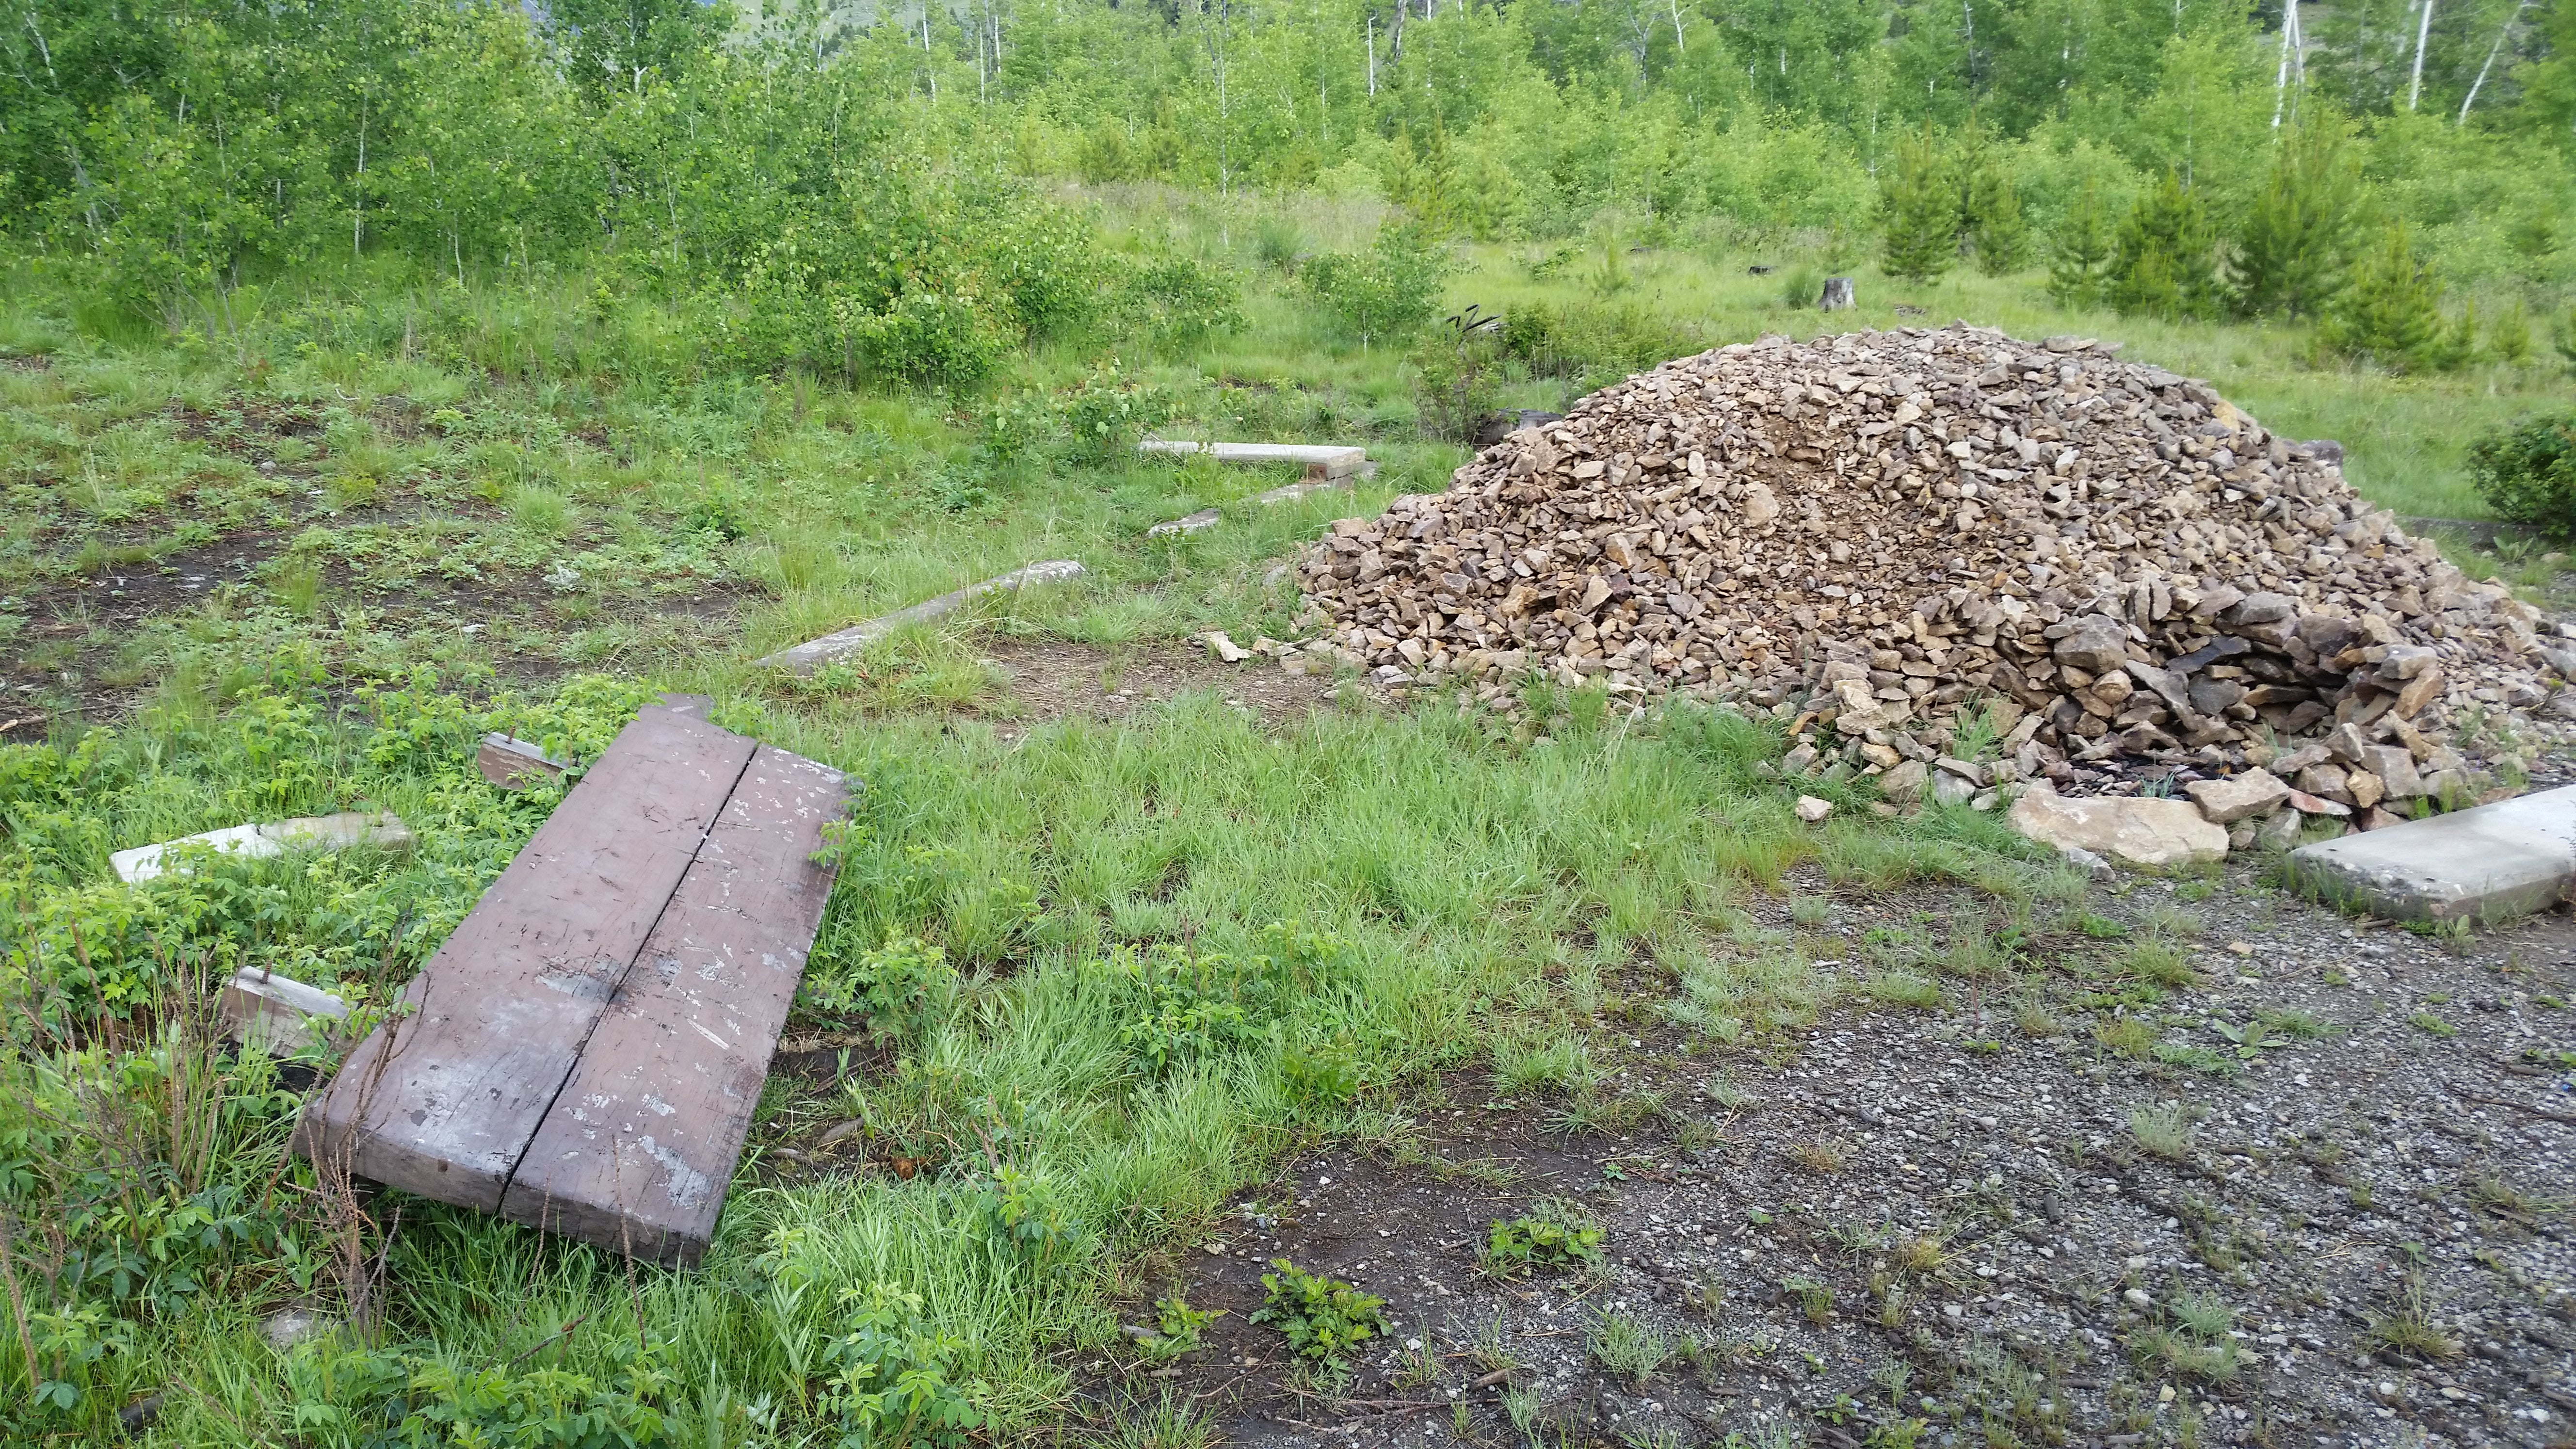 Dismantled site, think the pile of rock was the site of the now gone outhouse